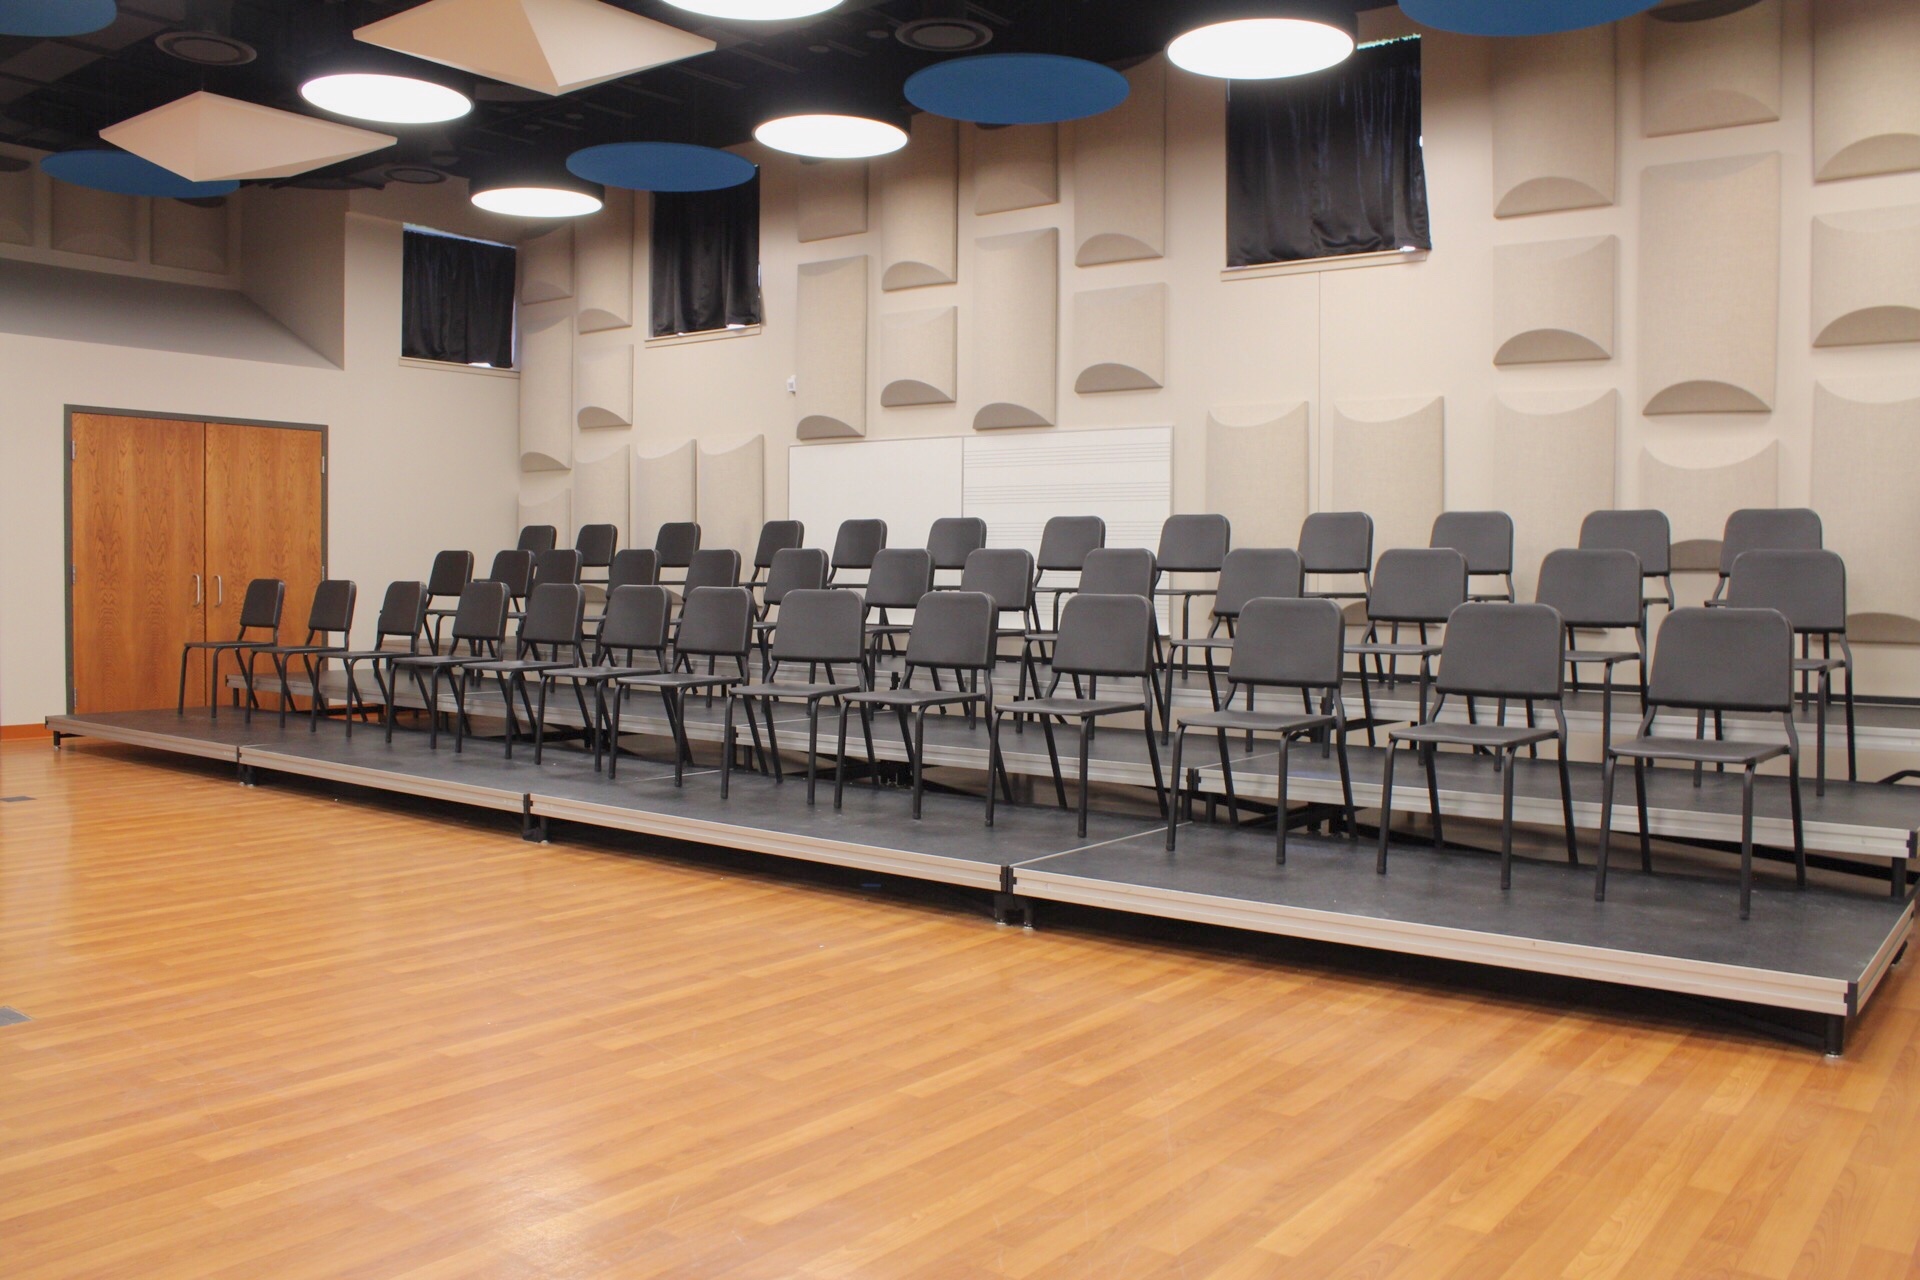 Jindra Fine Arts Choir Room has chairs on risers, black out curtains and acoustic panels on the walls. The chairs face a wall of mirrors.